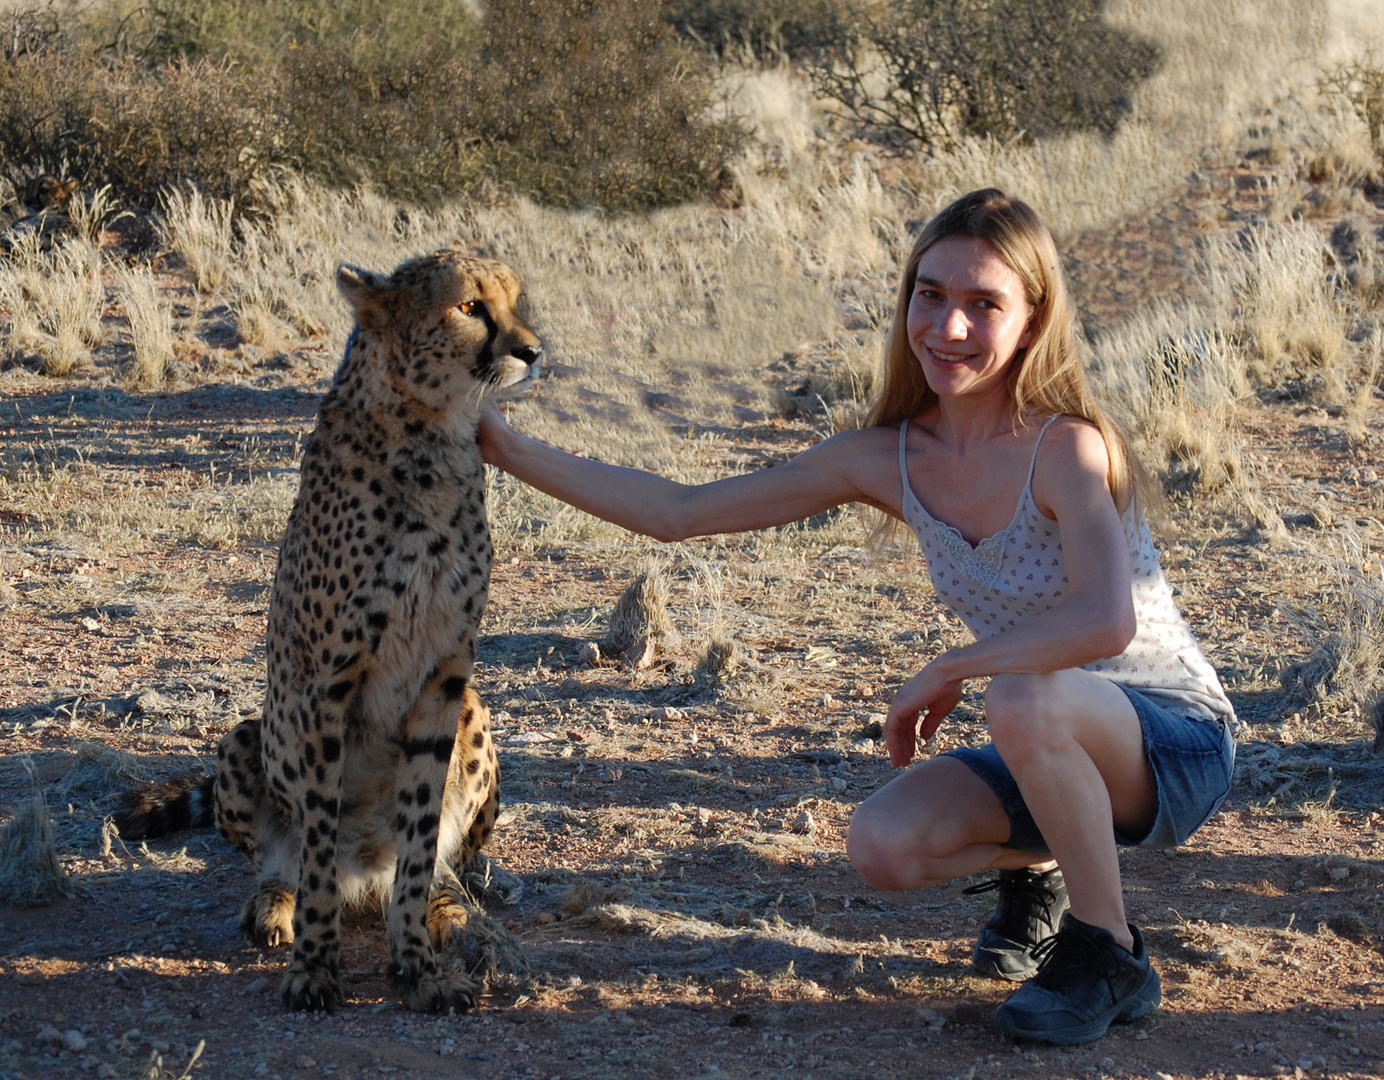 In love with the cheetah